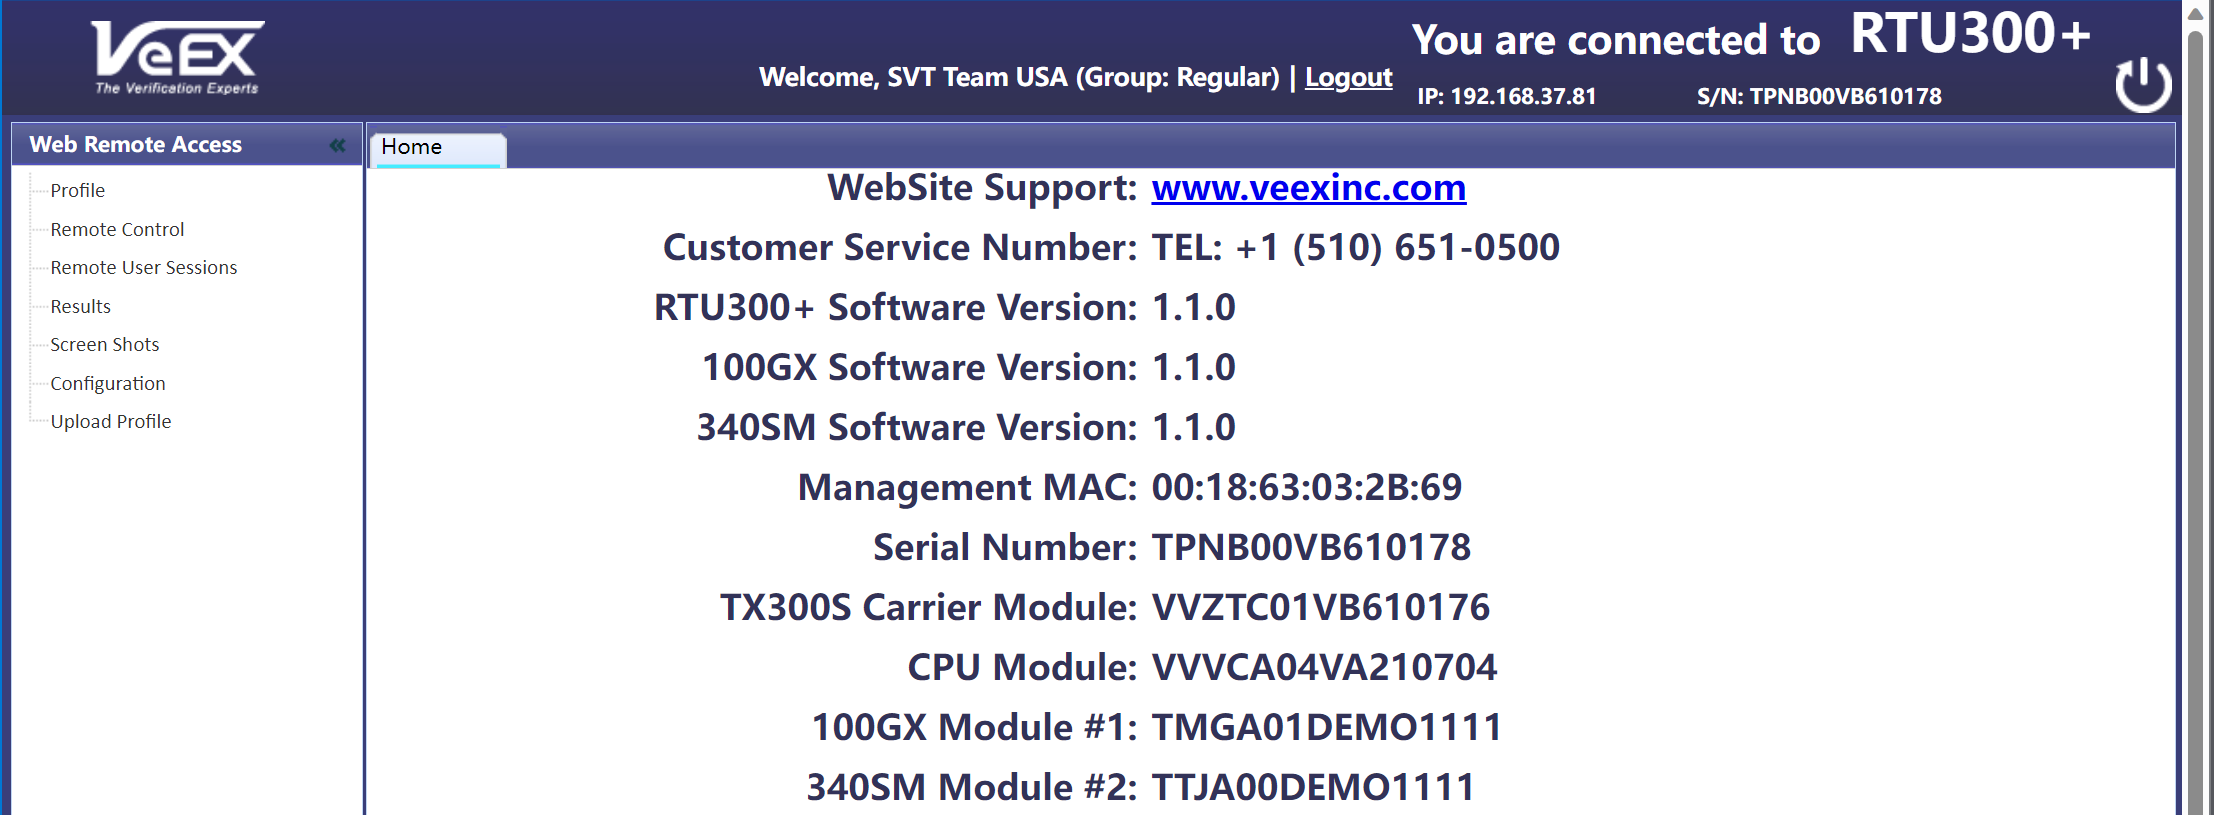 RTU-300+ software versions displayed on the Home page of the Web Remote Access.